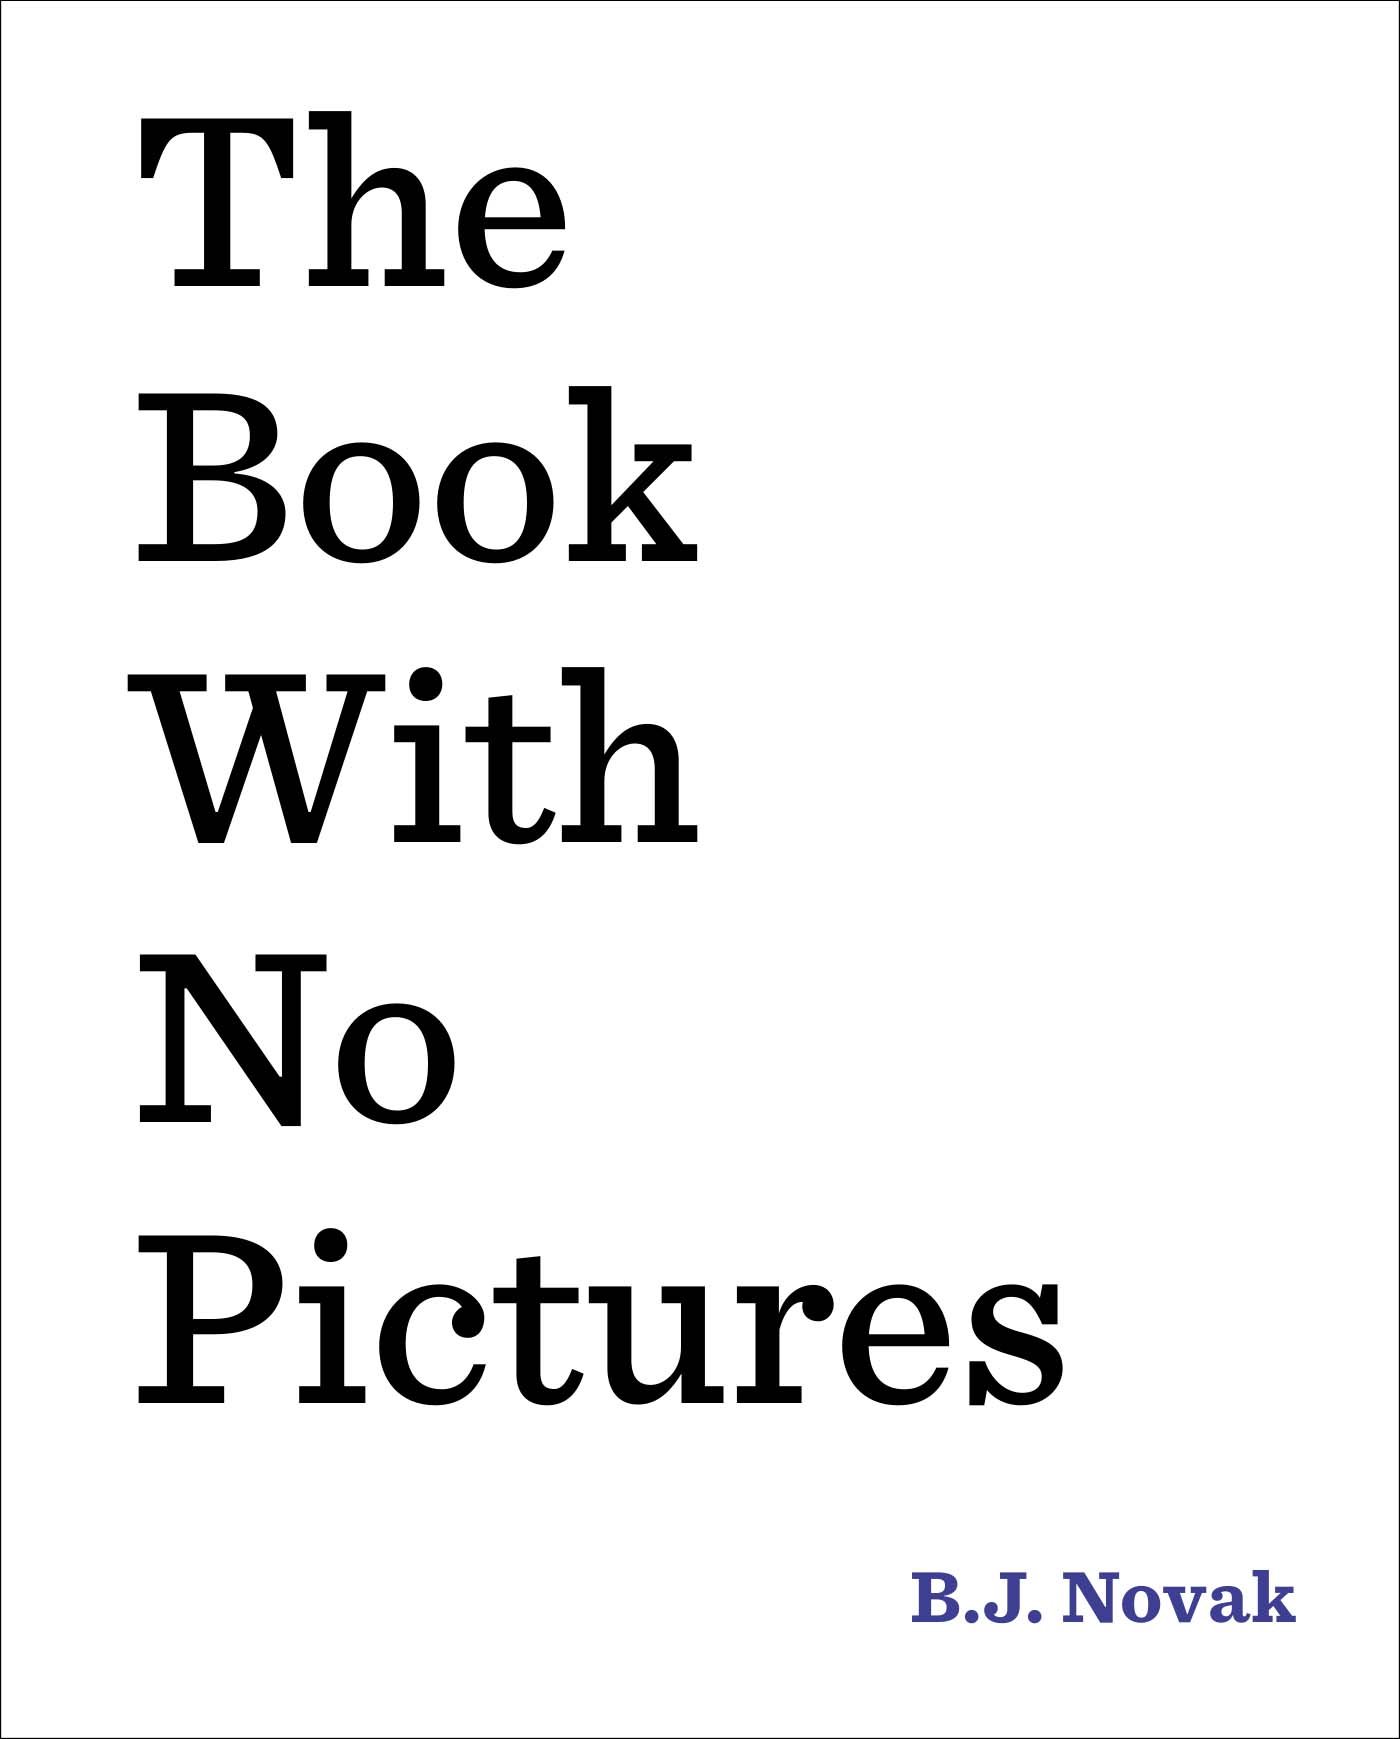 The-Book-With-No-Pictures